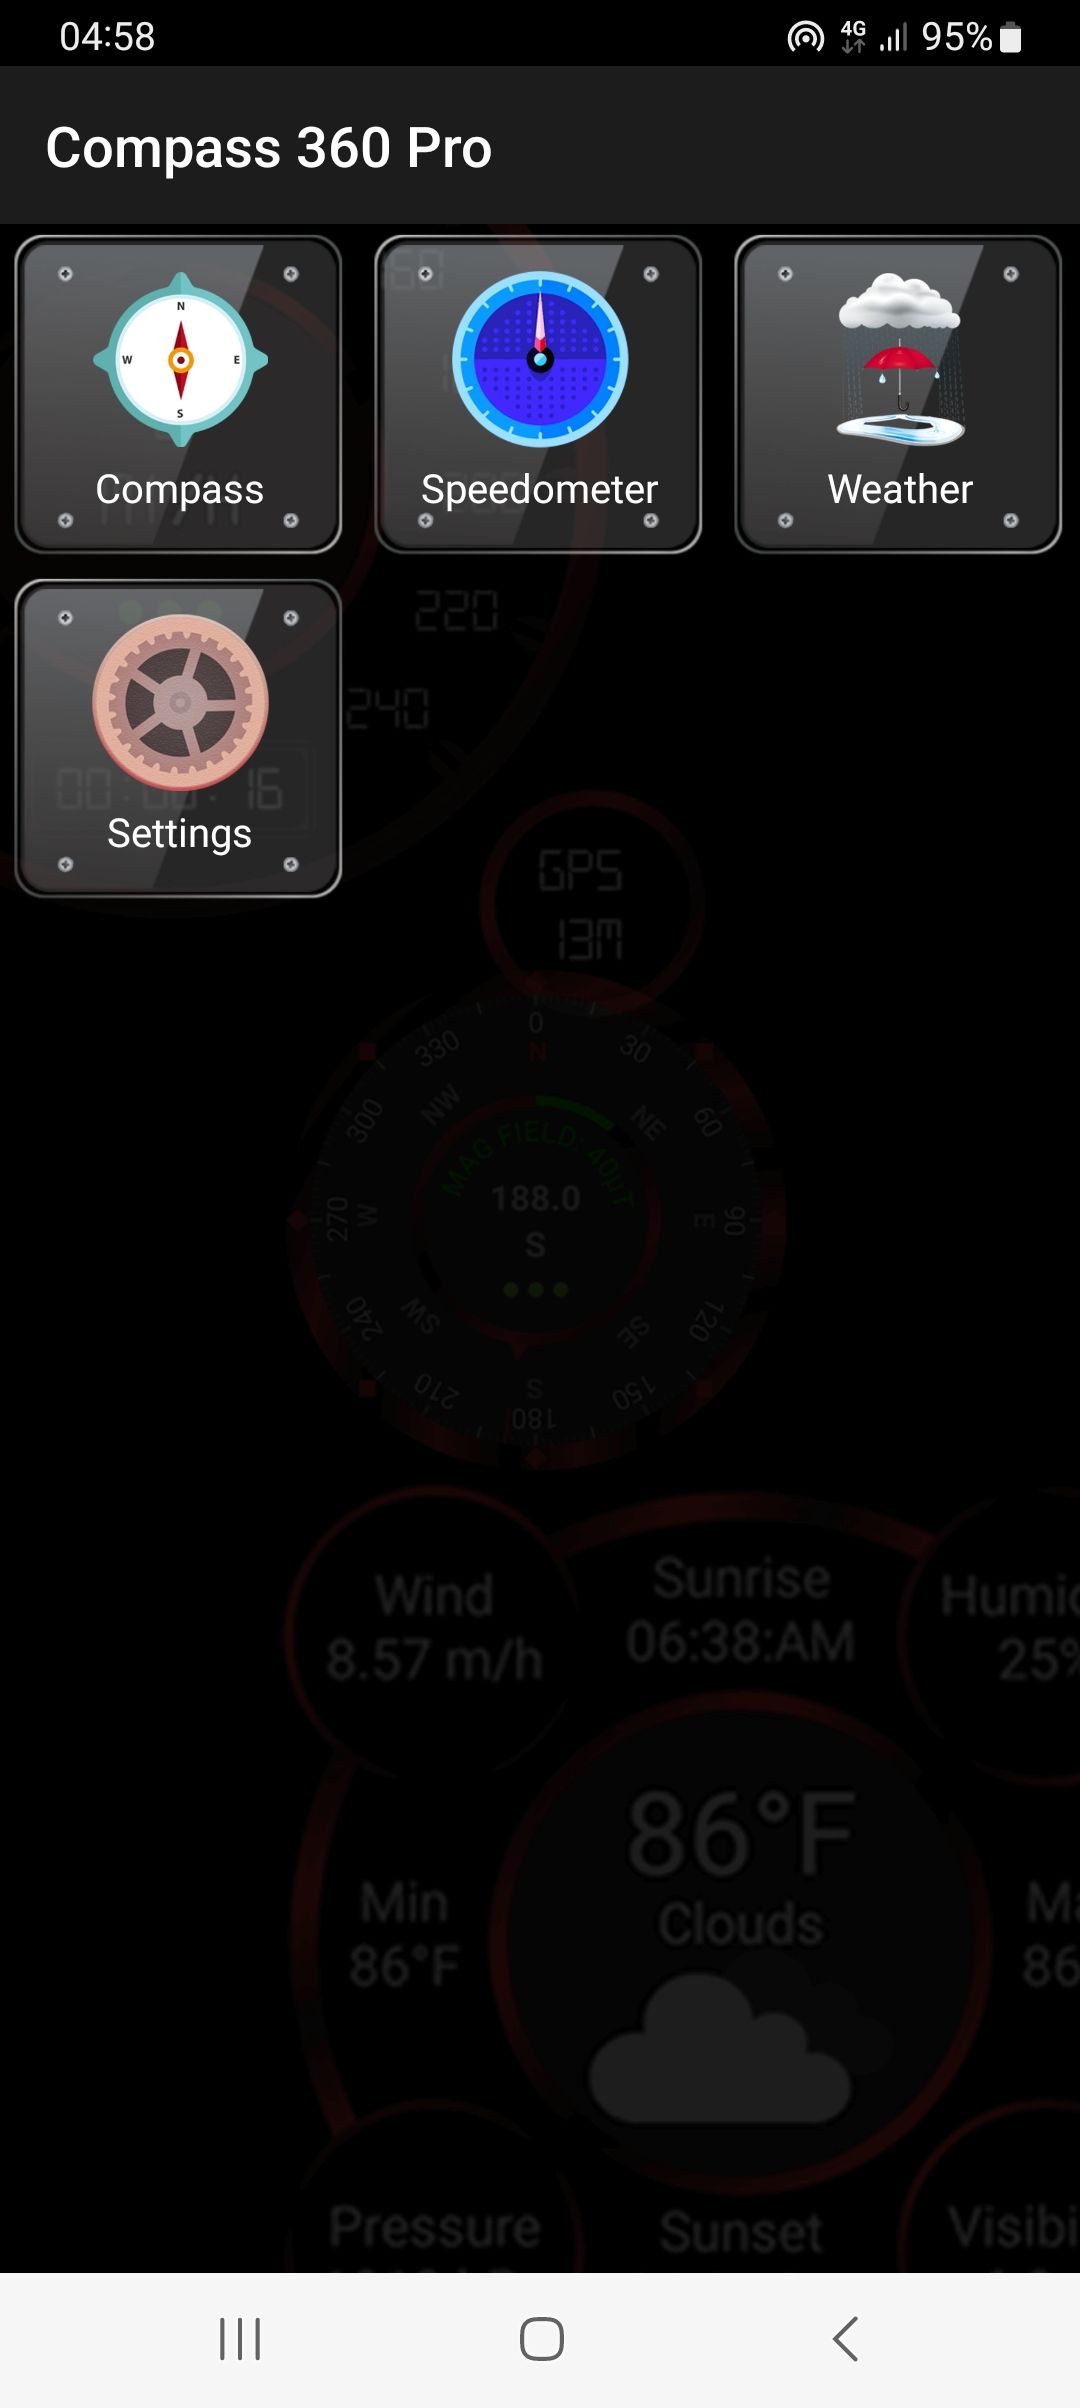 Compass 360 Pro's compass, speedometer, and weather tools